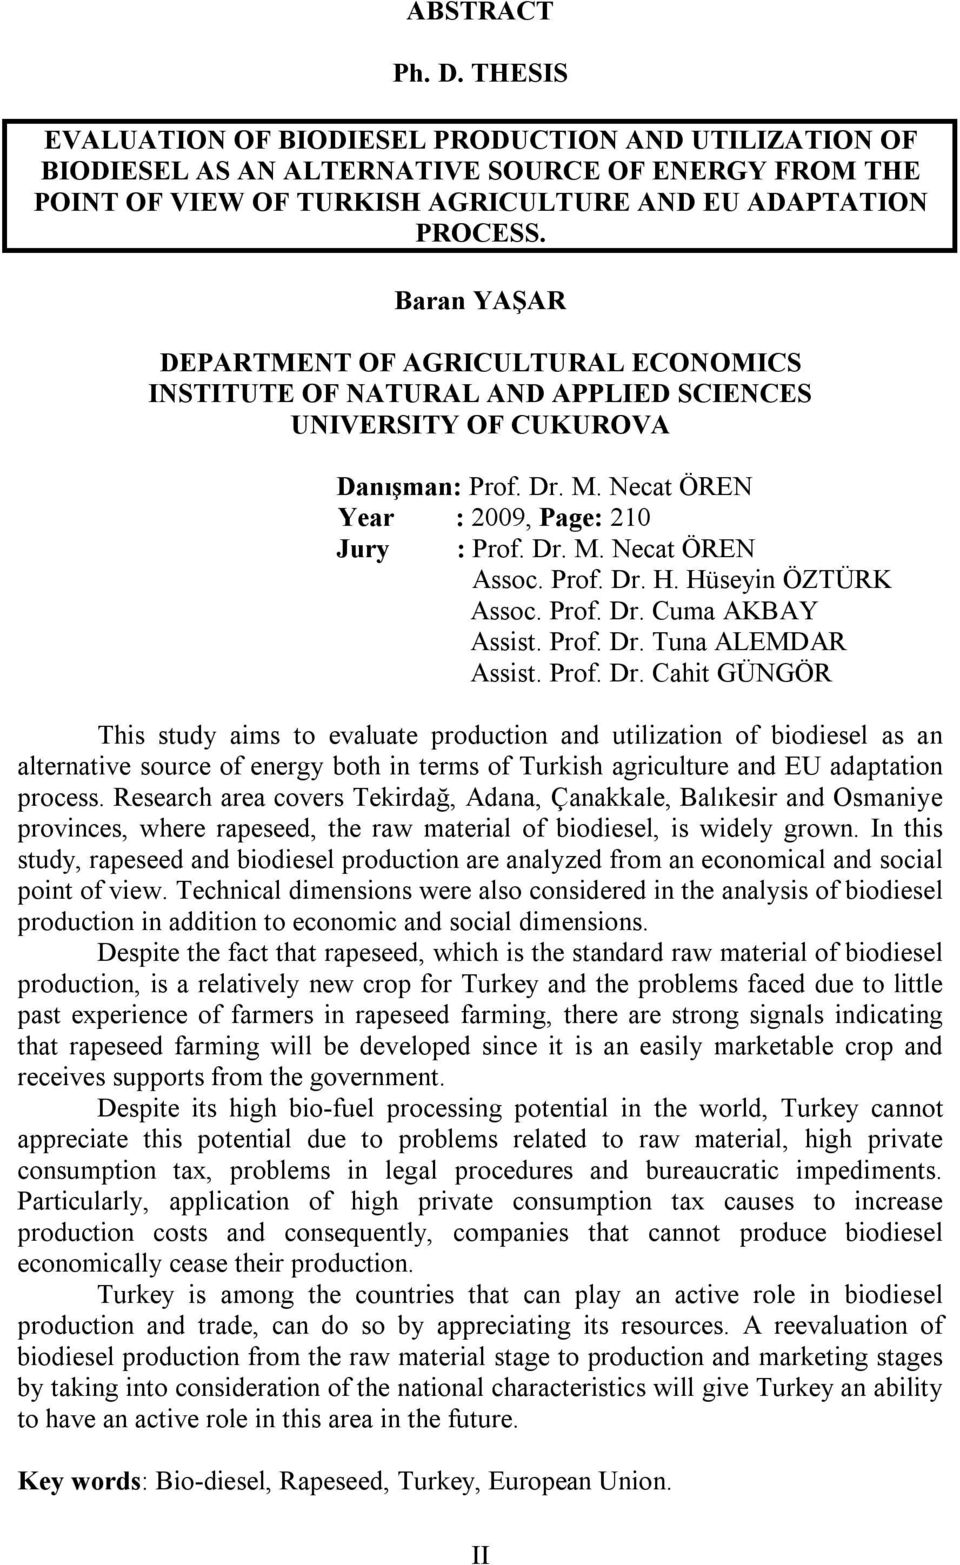 Prof. Dr. H. Hüseyin ÖZTÜRK Assoc. Prof. Dr. Cuma AKBAY Assist. Prof. Dr. Tuna ALEMDAR Assist. Prof. Dr. Cahit GÜNGÖR This study aims to evaluate production and utilization of biodiesel as an alternative source of energy both in terms of Turkish agriculture and EU adaptation process.